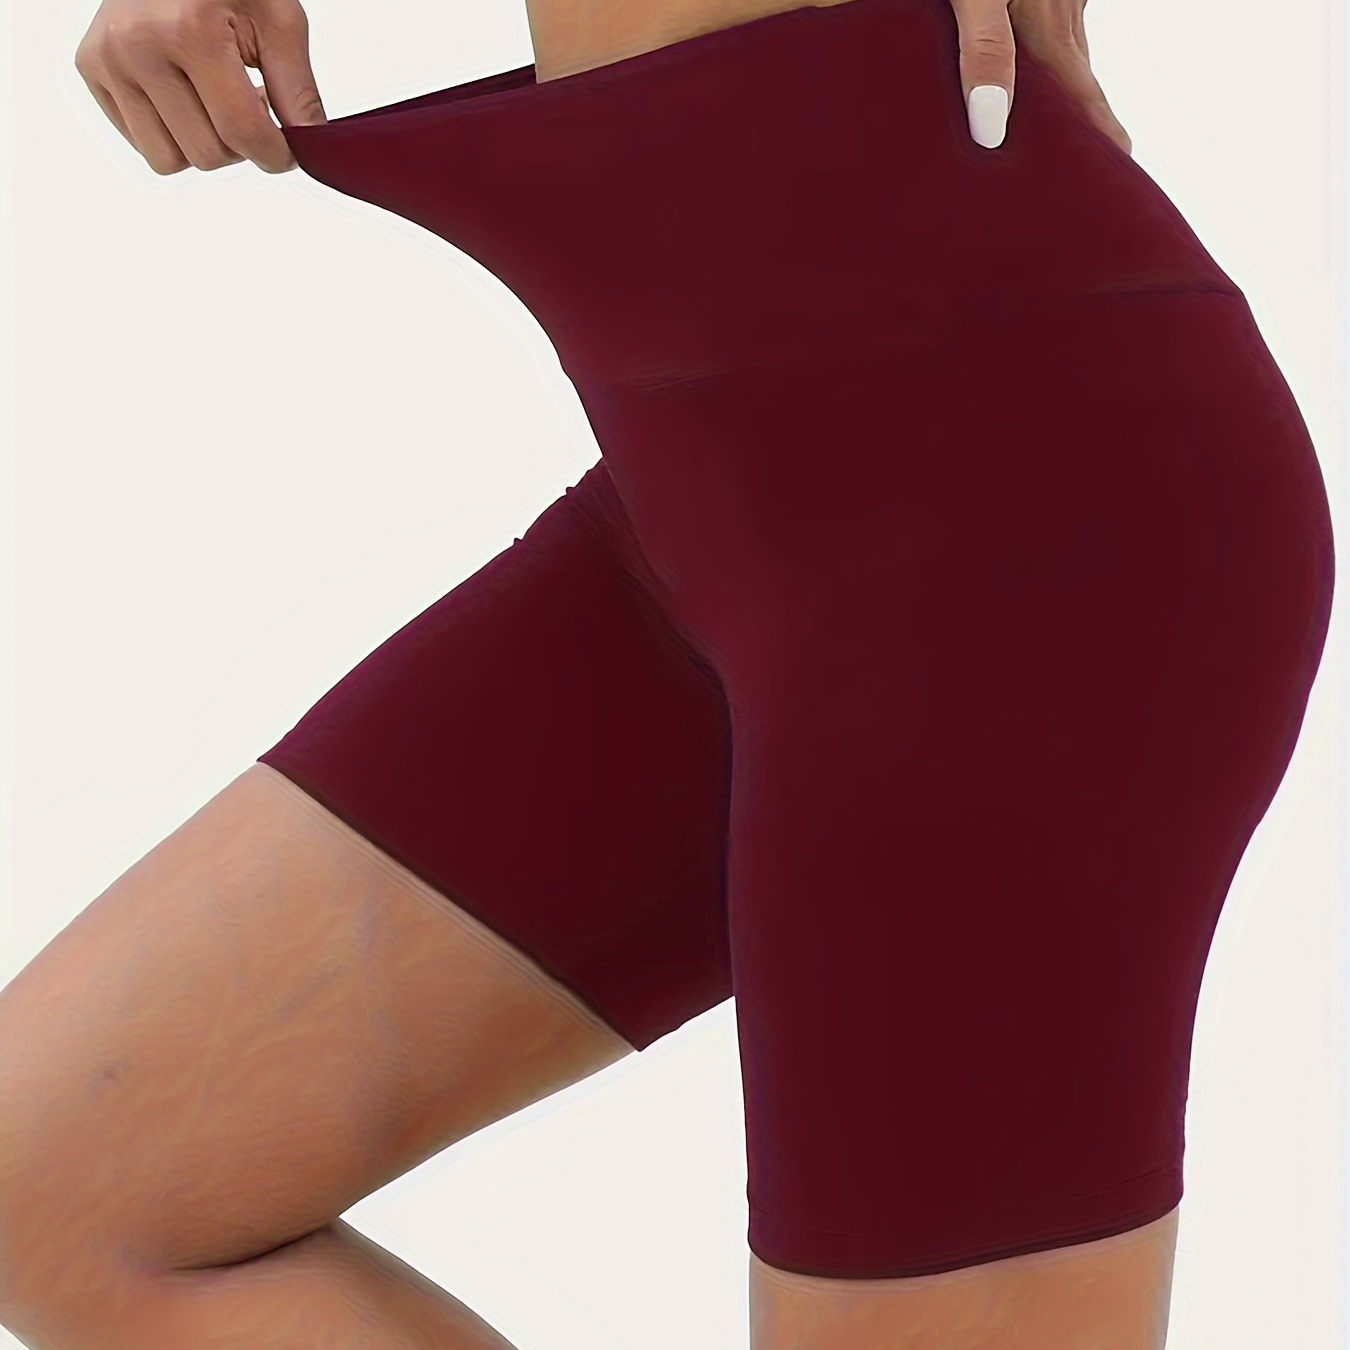 

Women's High-waisted Sculpting Cycling Shorts, Solid Color Ultra-soft High-elasticity Yoga Fitness Short Tights